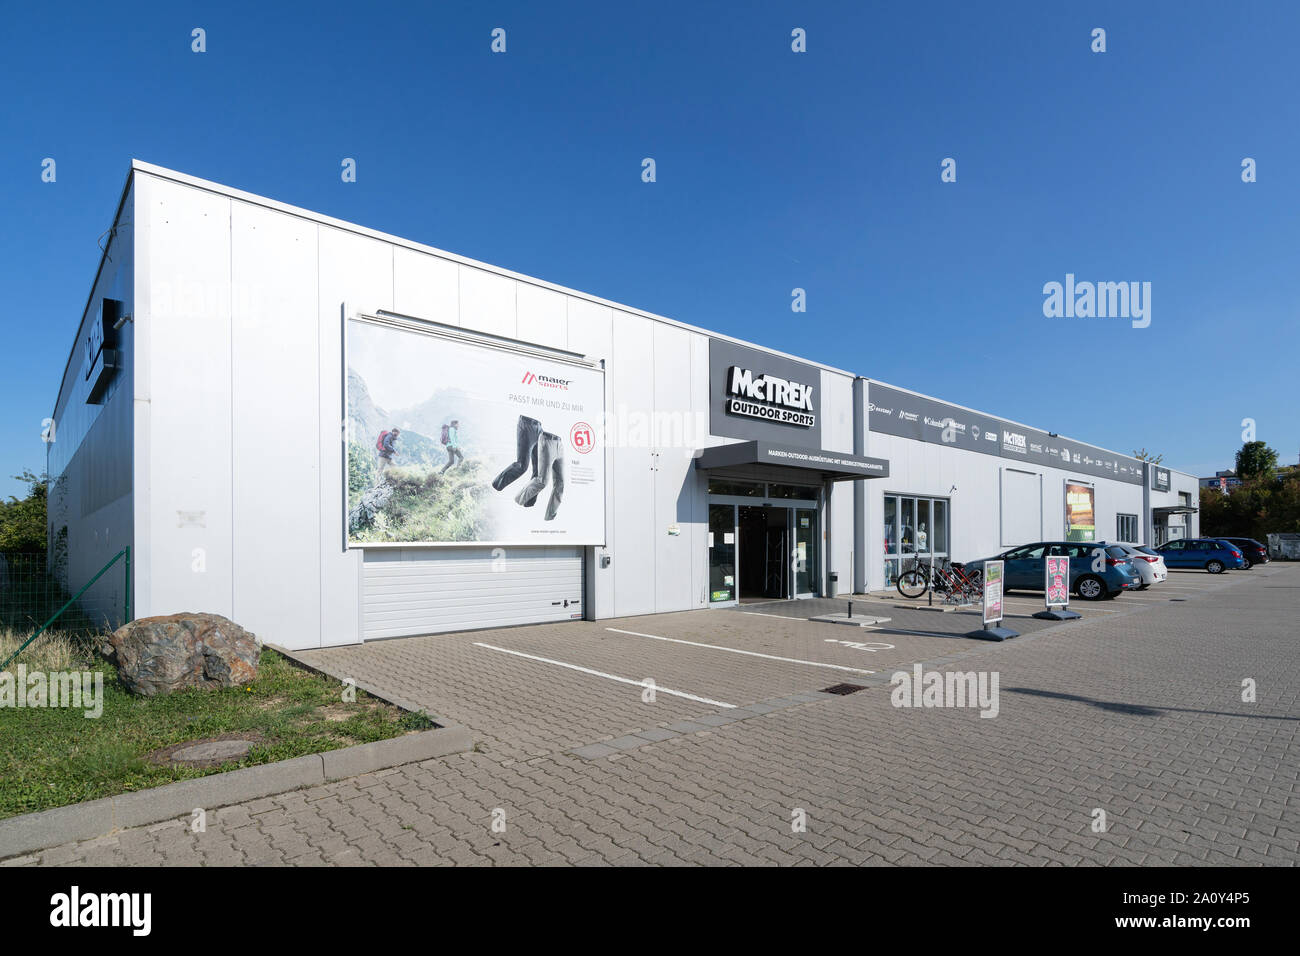 Decathlon exterior hi-res stock photography and images - Alamy